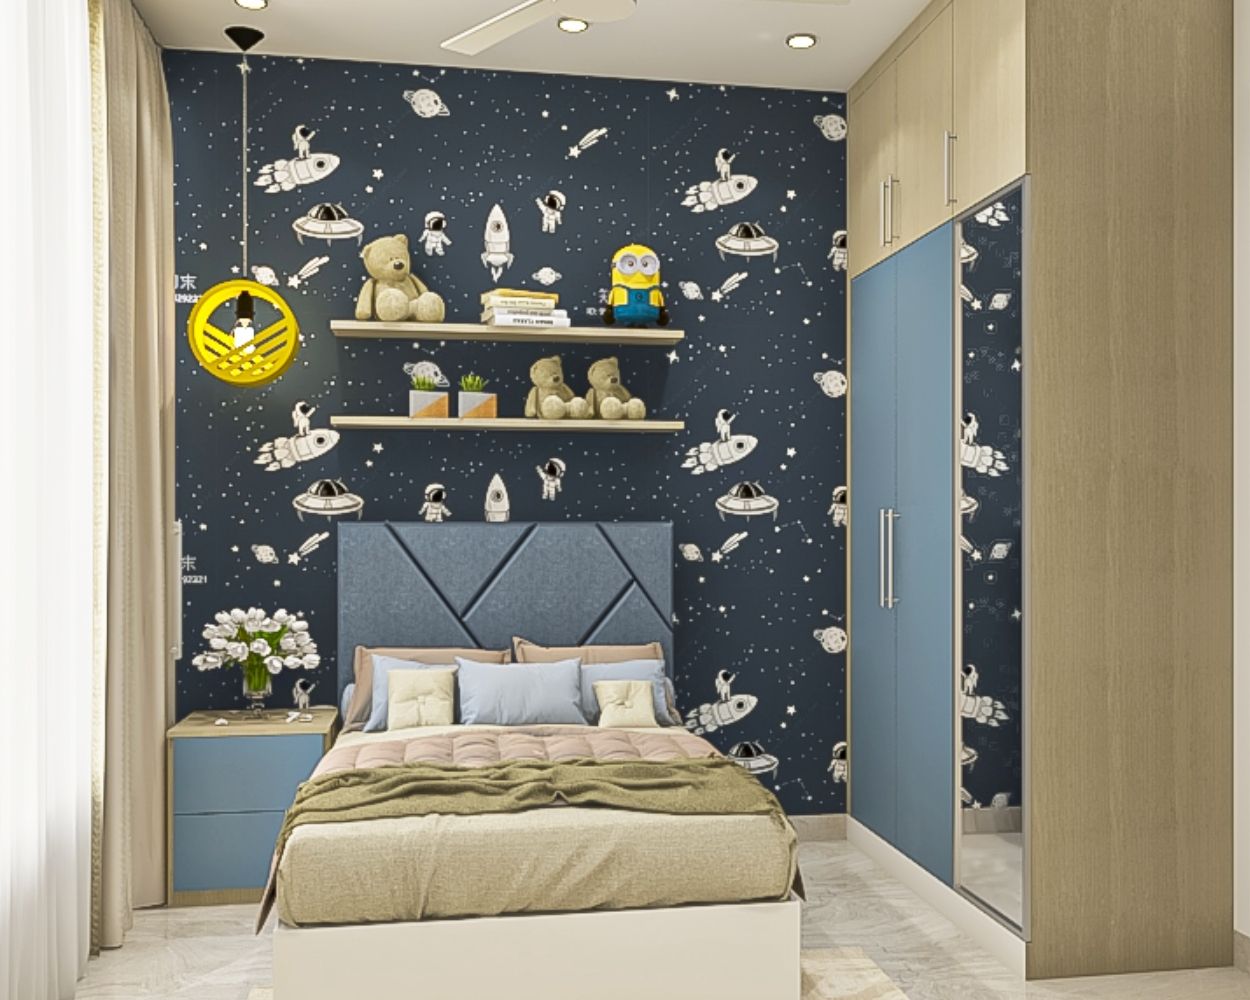 Modern Kids Bedroom Design With Space Themed Wallpaper